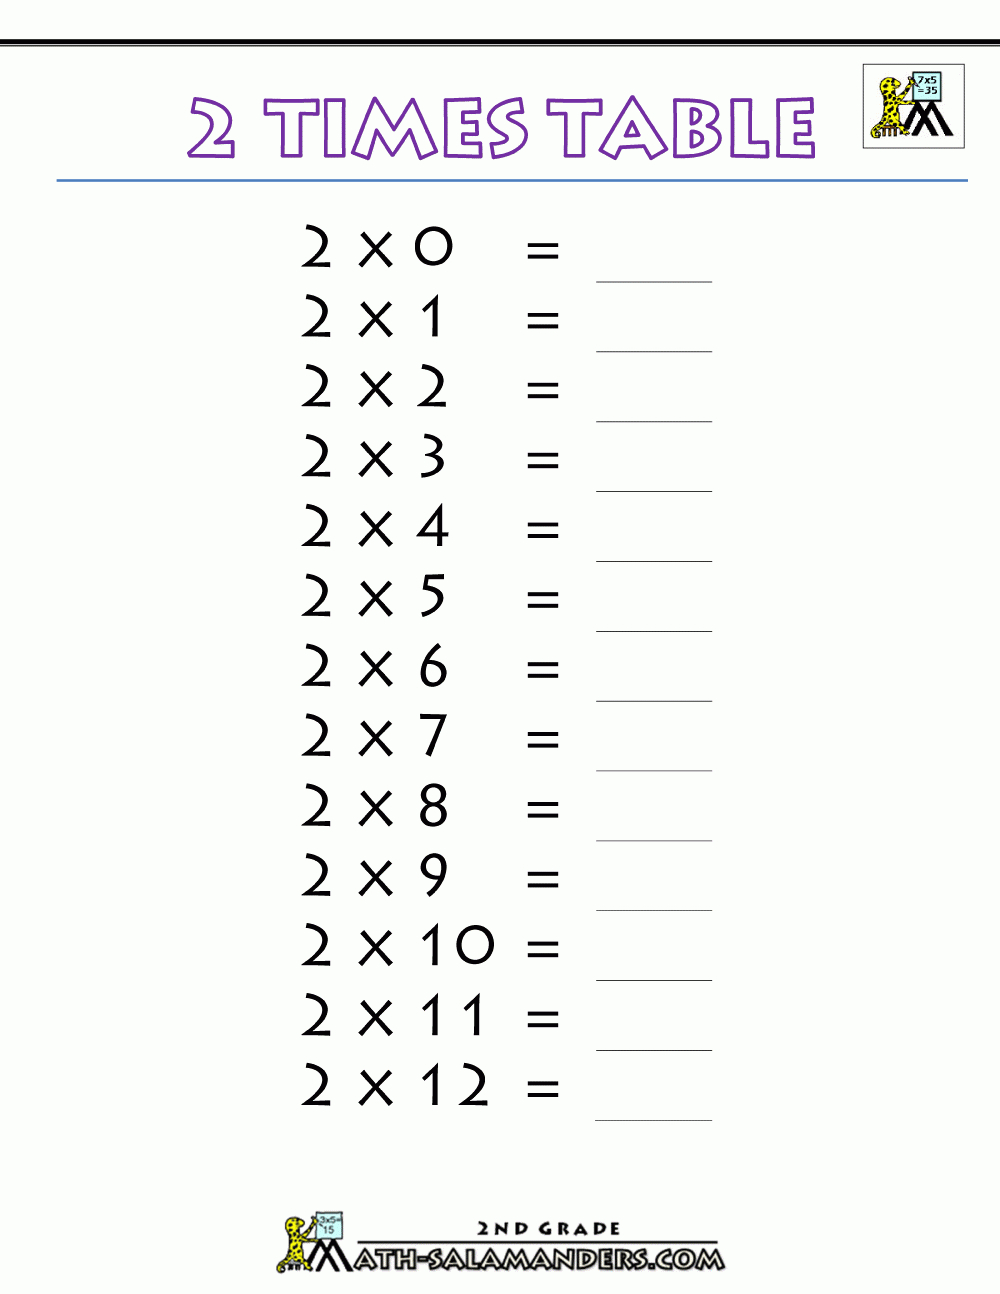 2 Times Table And Time Table Worksheets For 2Nd Grade